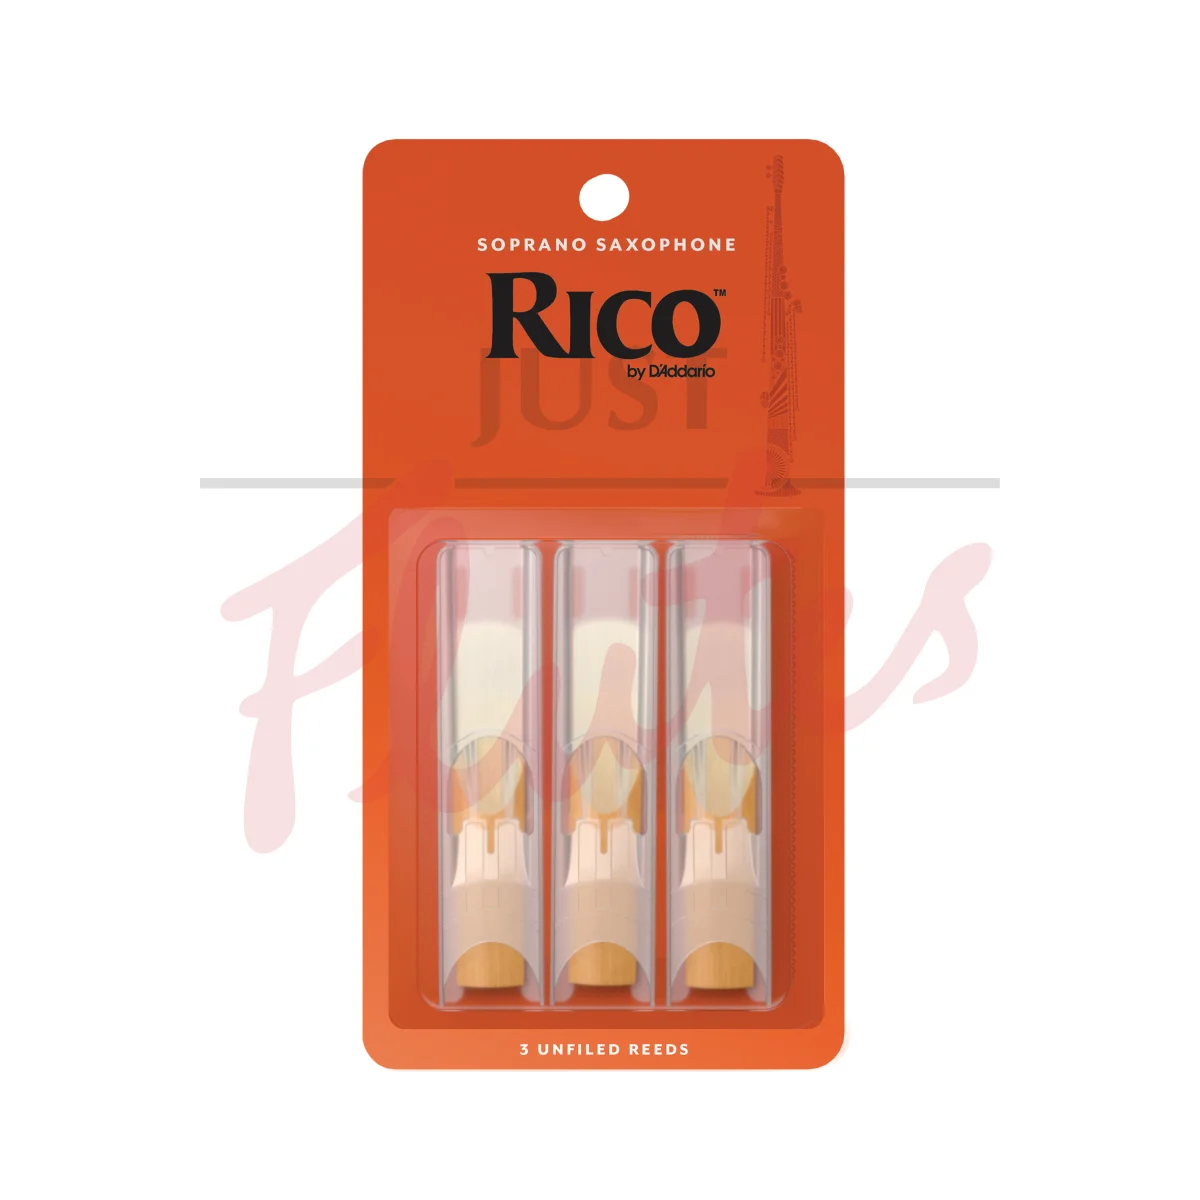 Rico by D'Addario RIA0320 Soprano Saxophone Reeds, Strength 2, Pack of 3